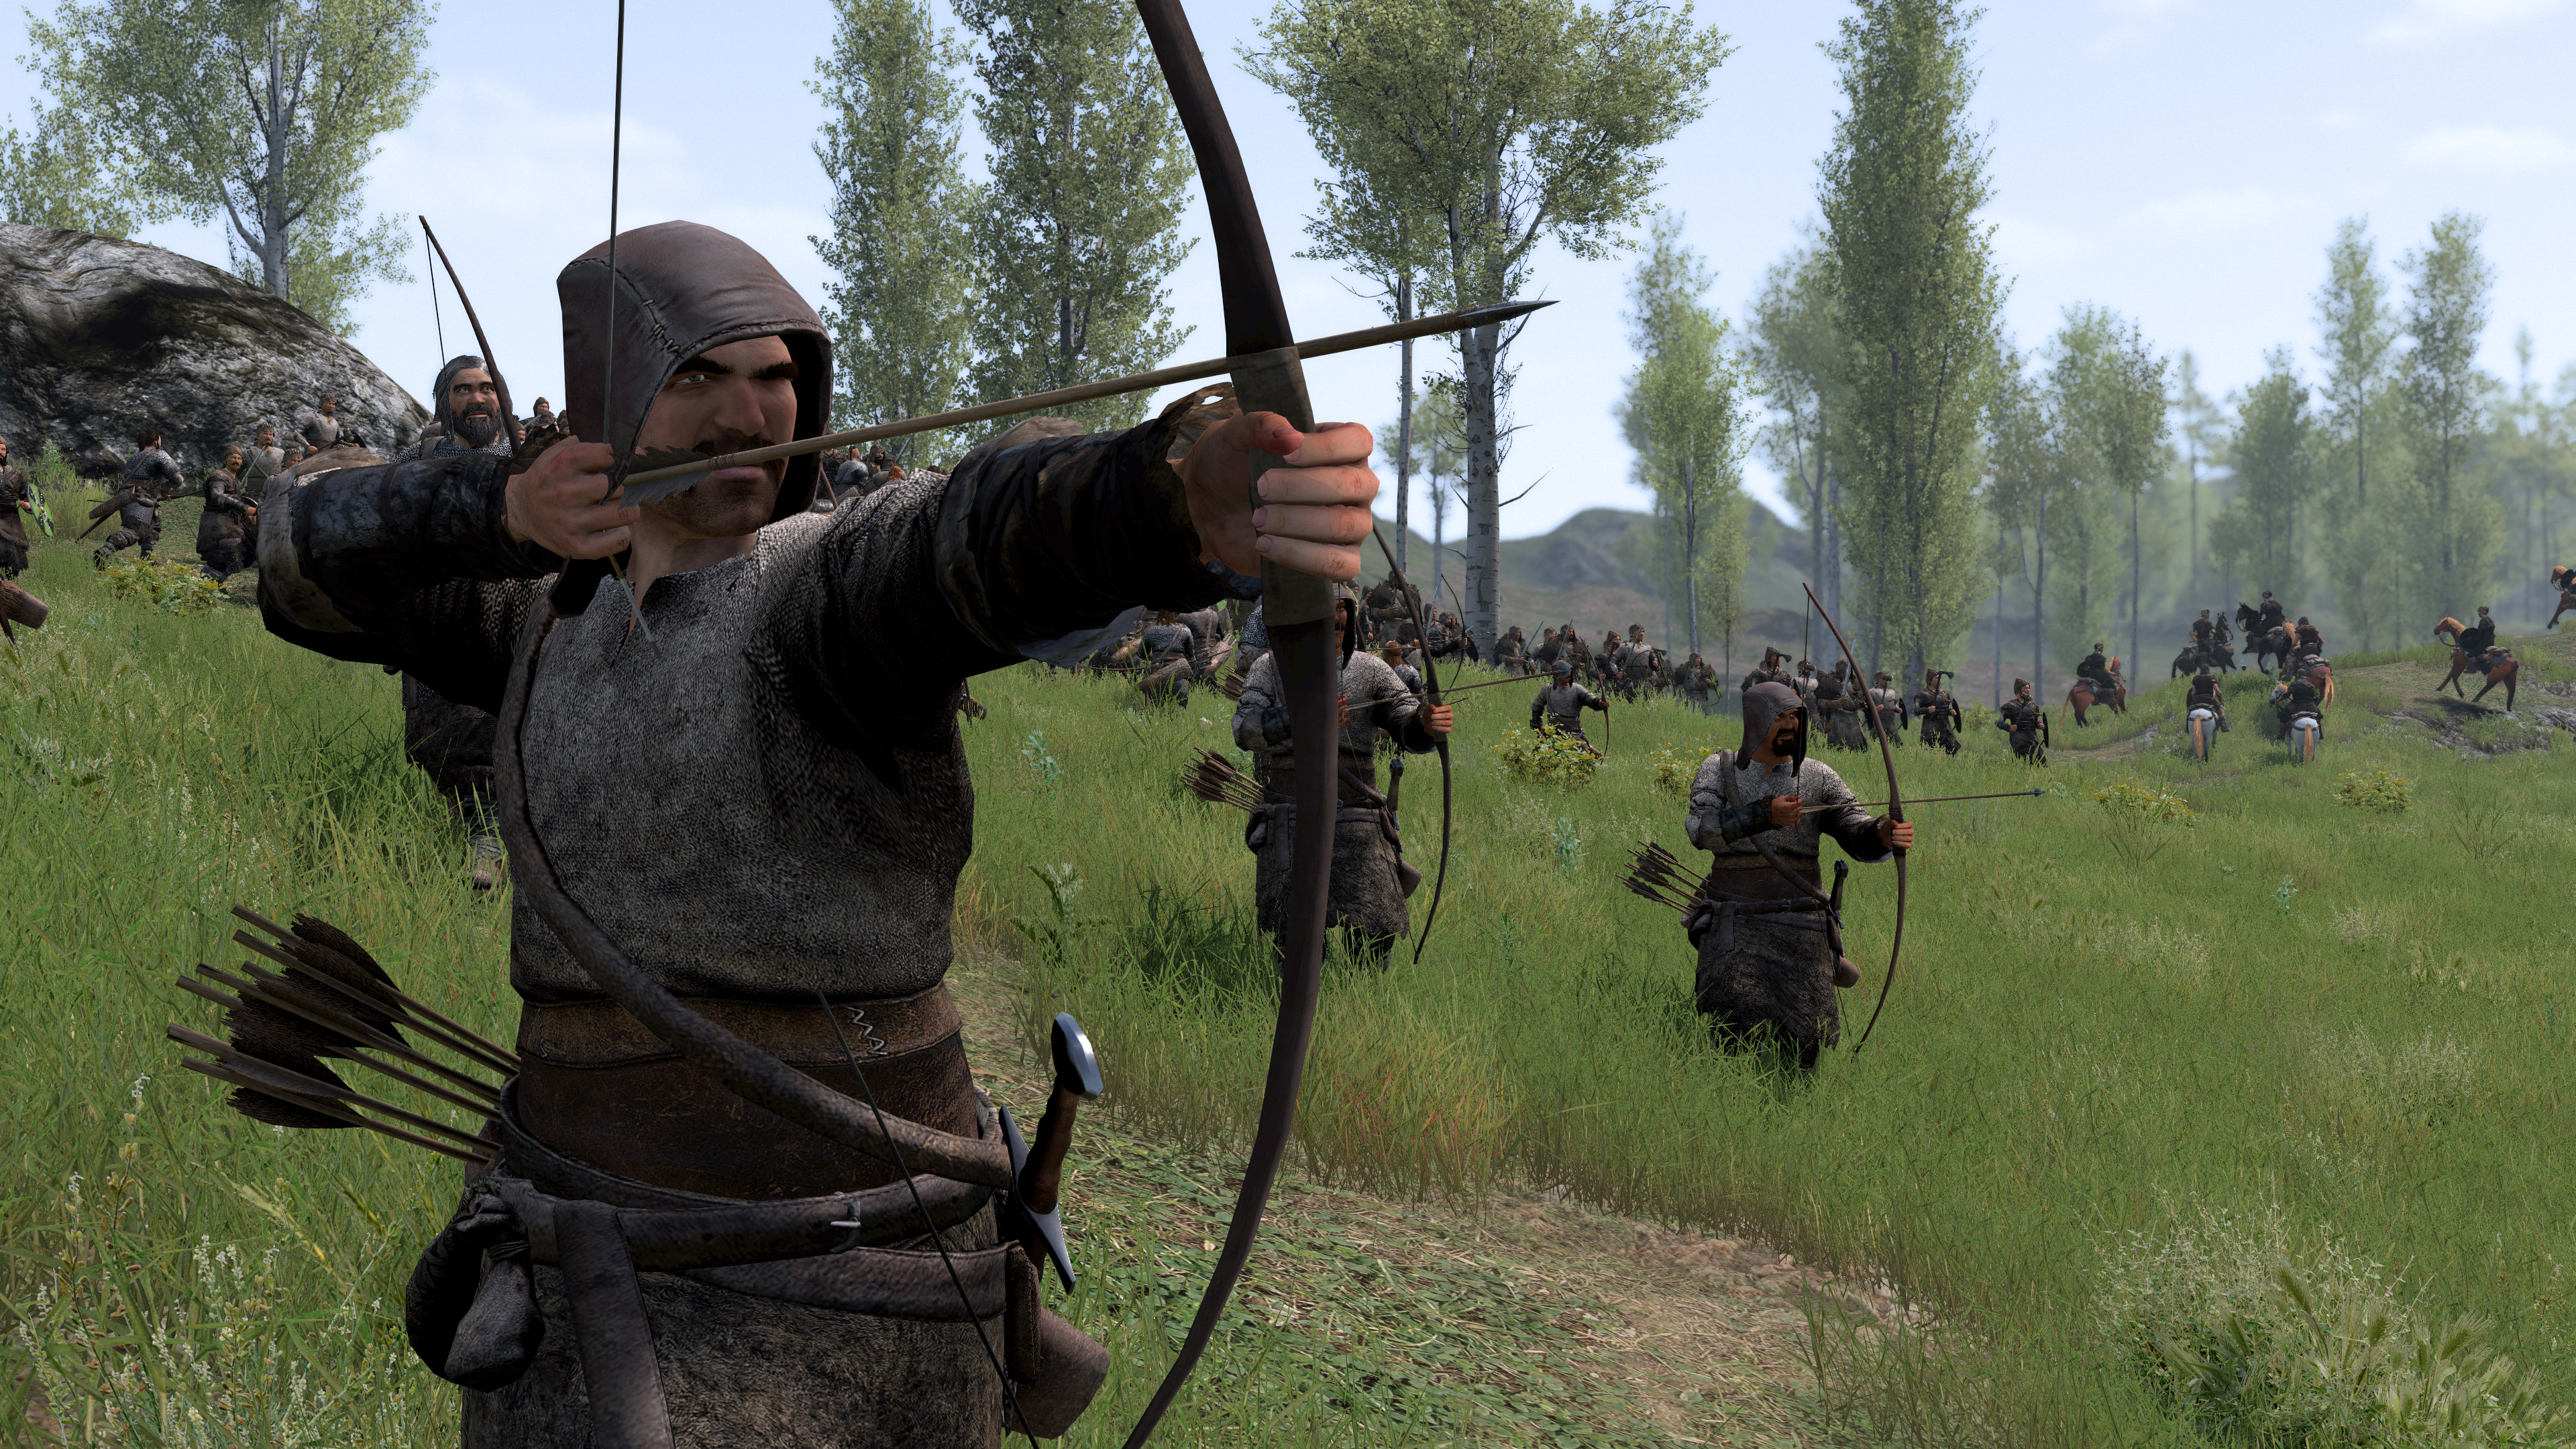 Mount and blade game. Mount and Blade 2. Monte Blade 2 Bannerlord. Warband Bannerlord. Баннерлорд 1.